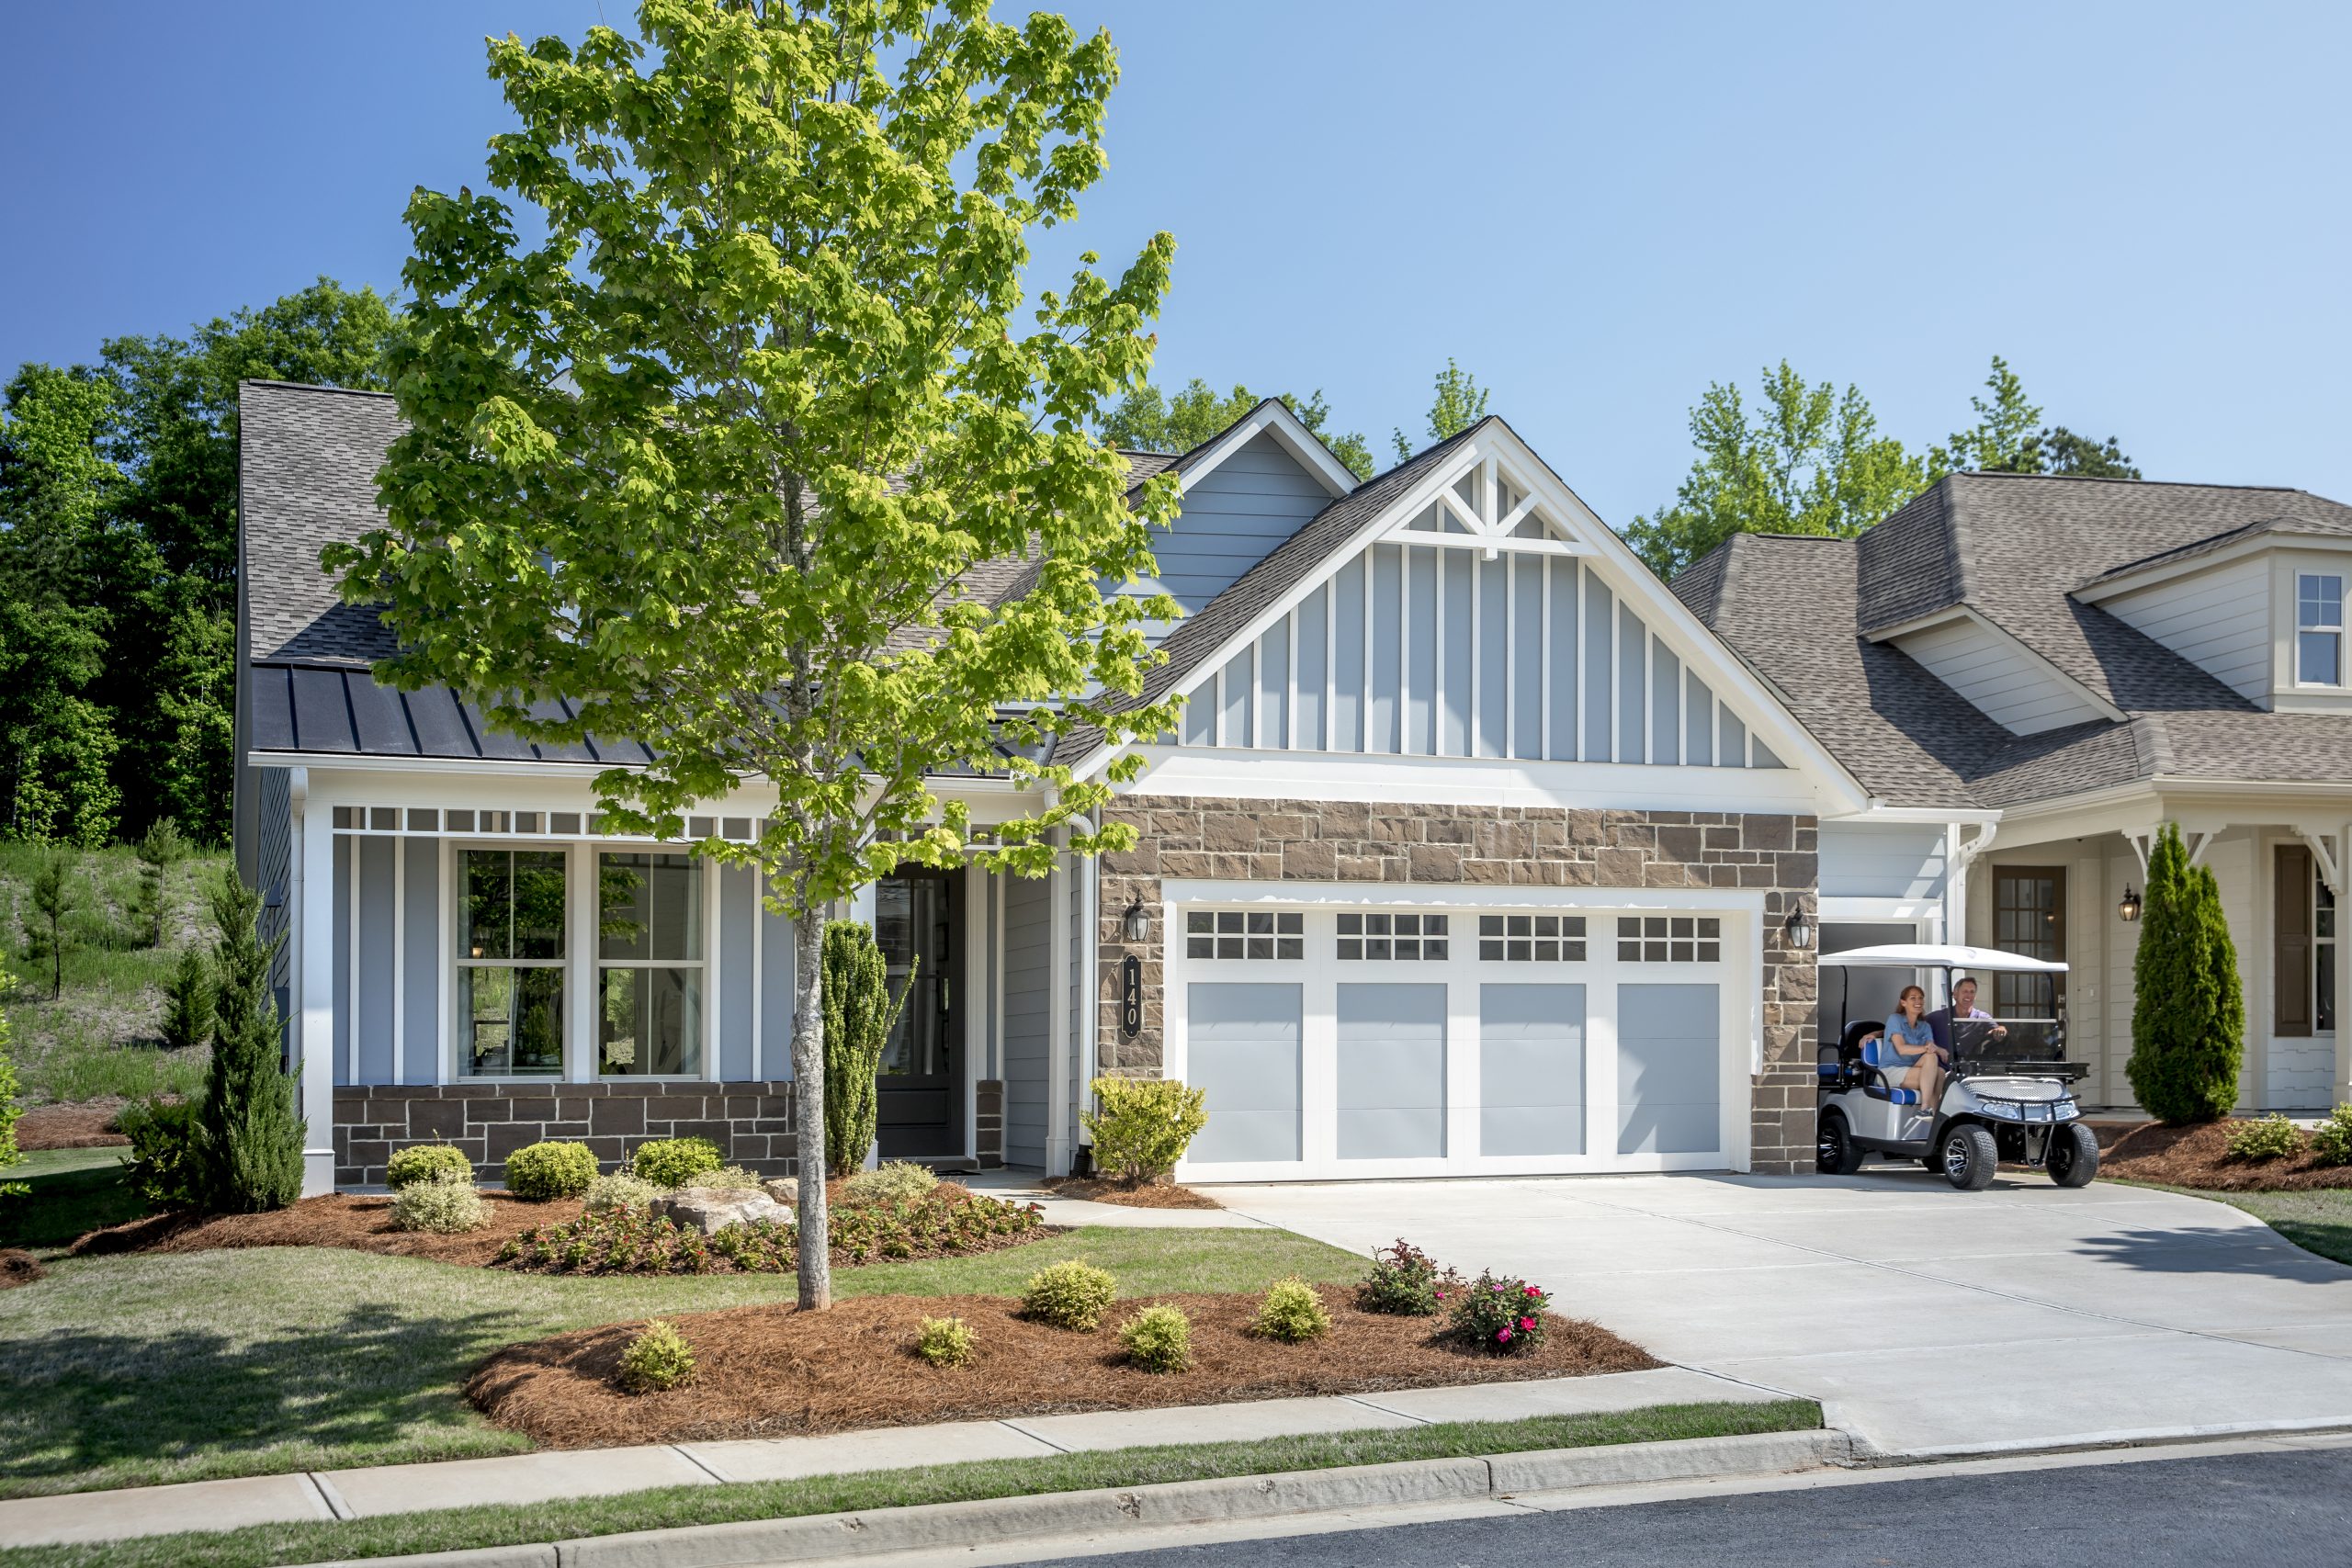 https://fiftyplushousing.com/kolter-homes-new-phase-active-adult-peachtree-city-community/